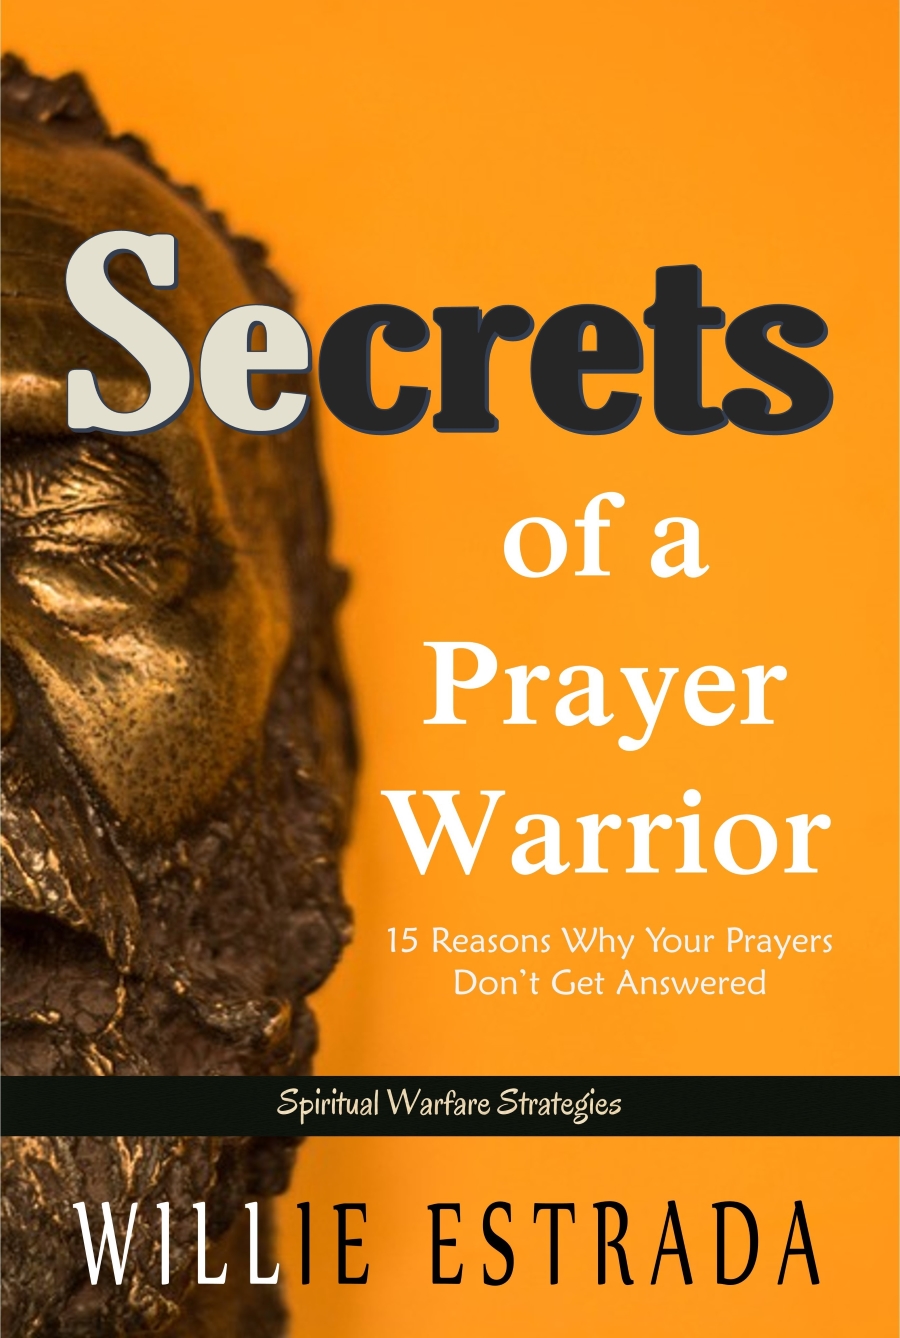 FREE: Secrets of a Prayer Warrior: 15 Reasons Why Your Prayers Don’t Get Answered by Willie Estrada